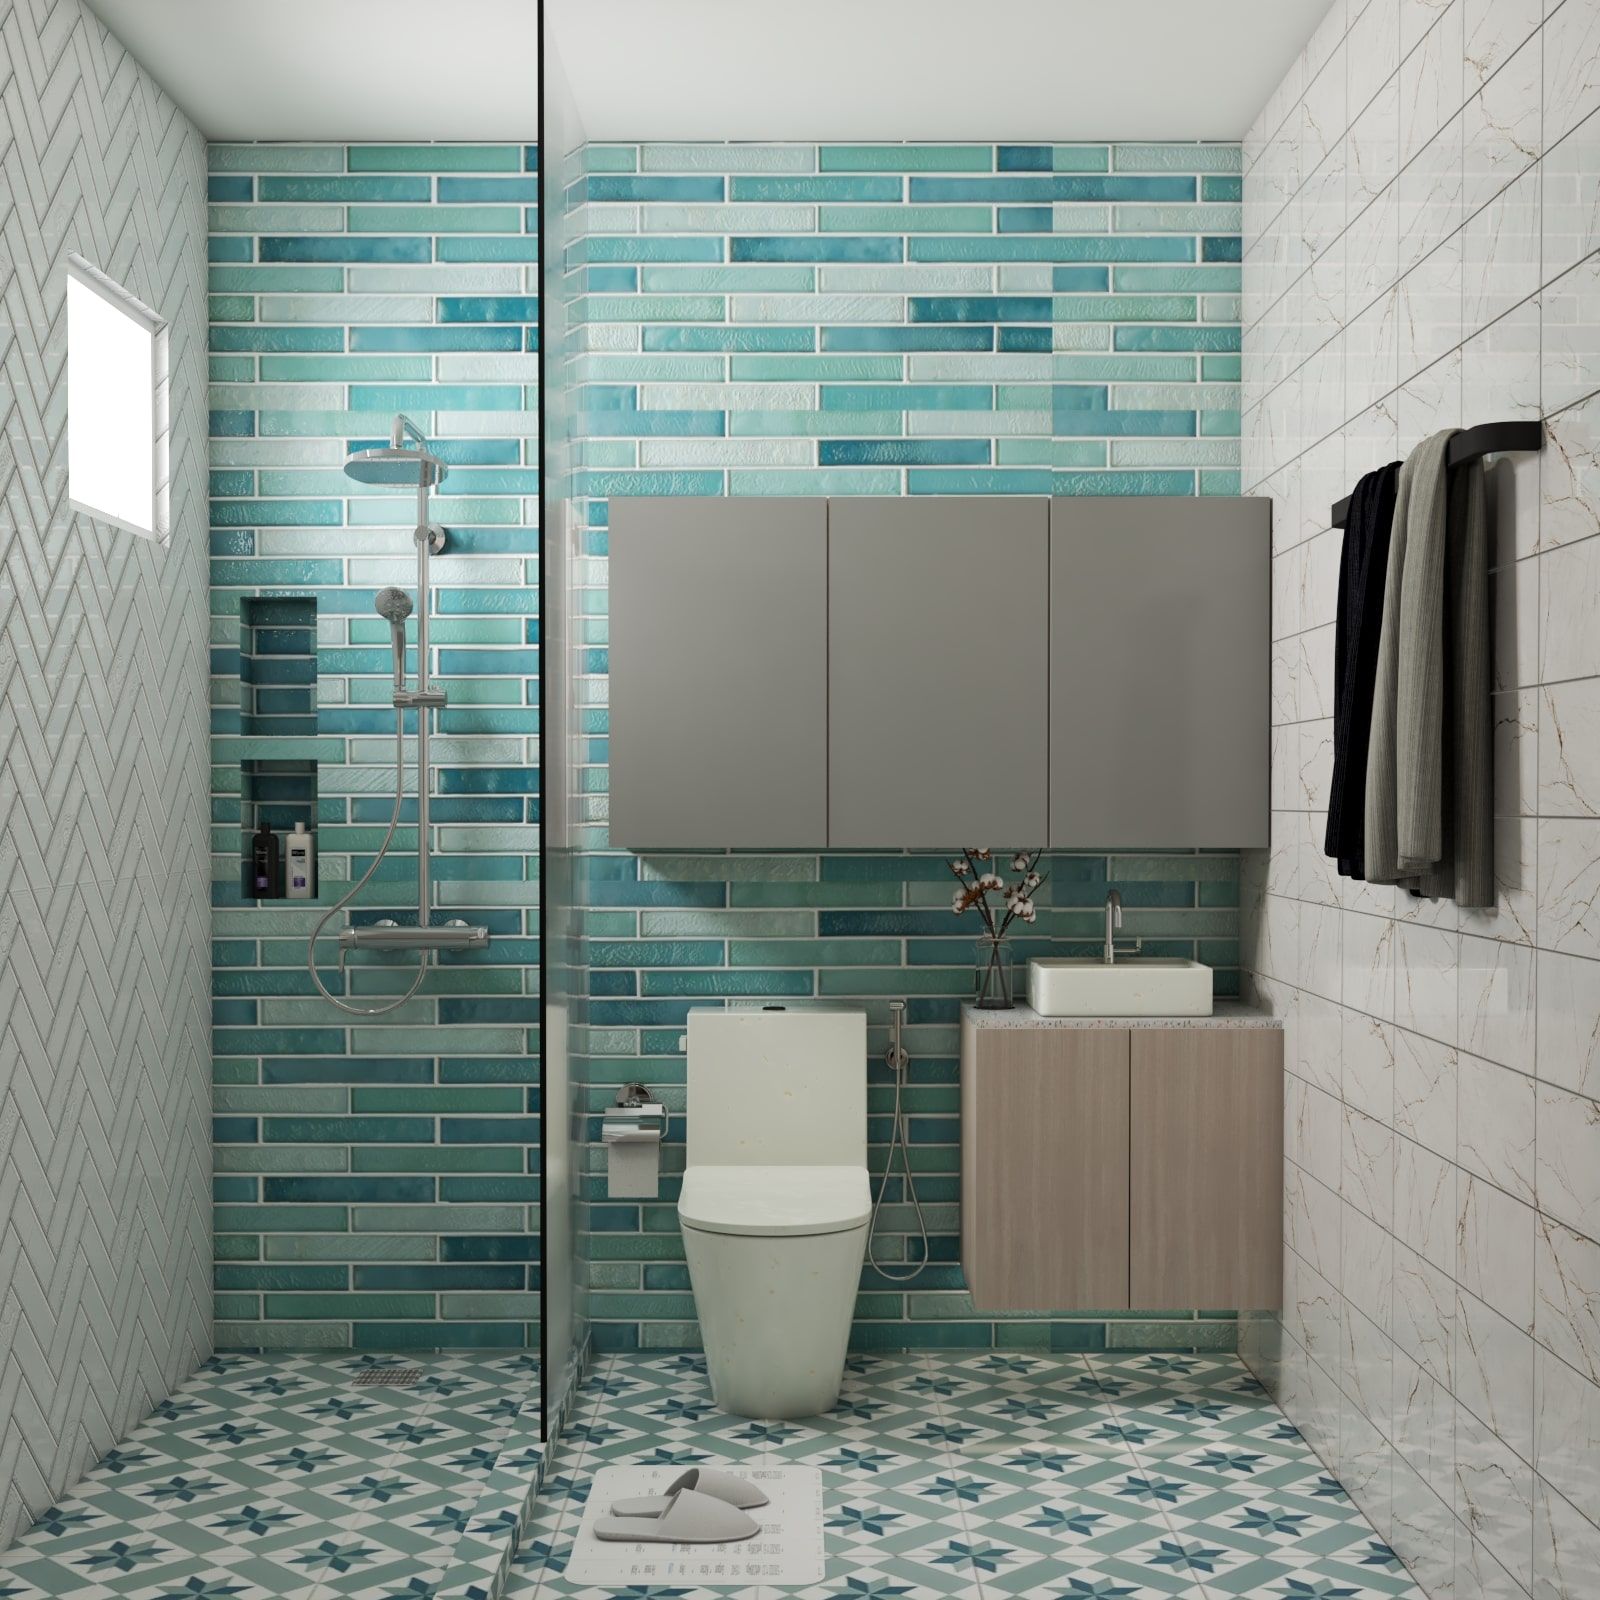 Contemporary Bathroom Design With Blue And Green Tiles